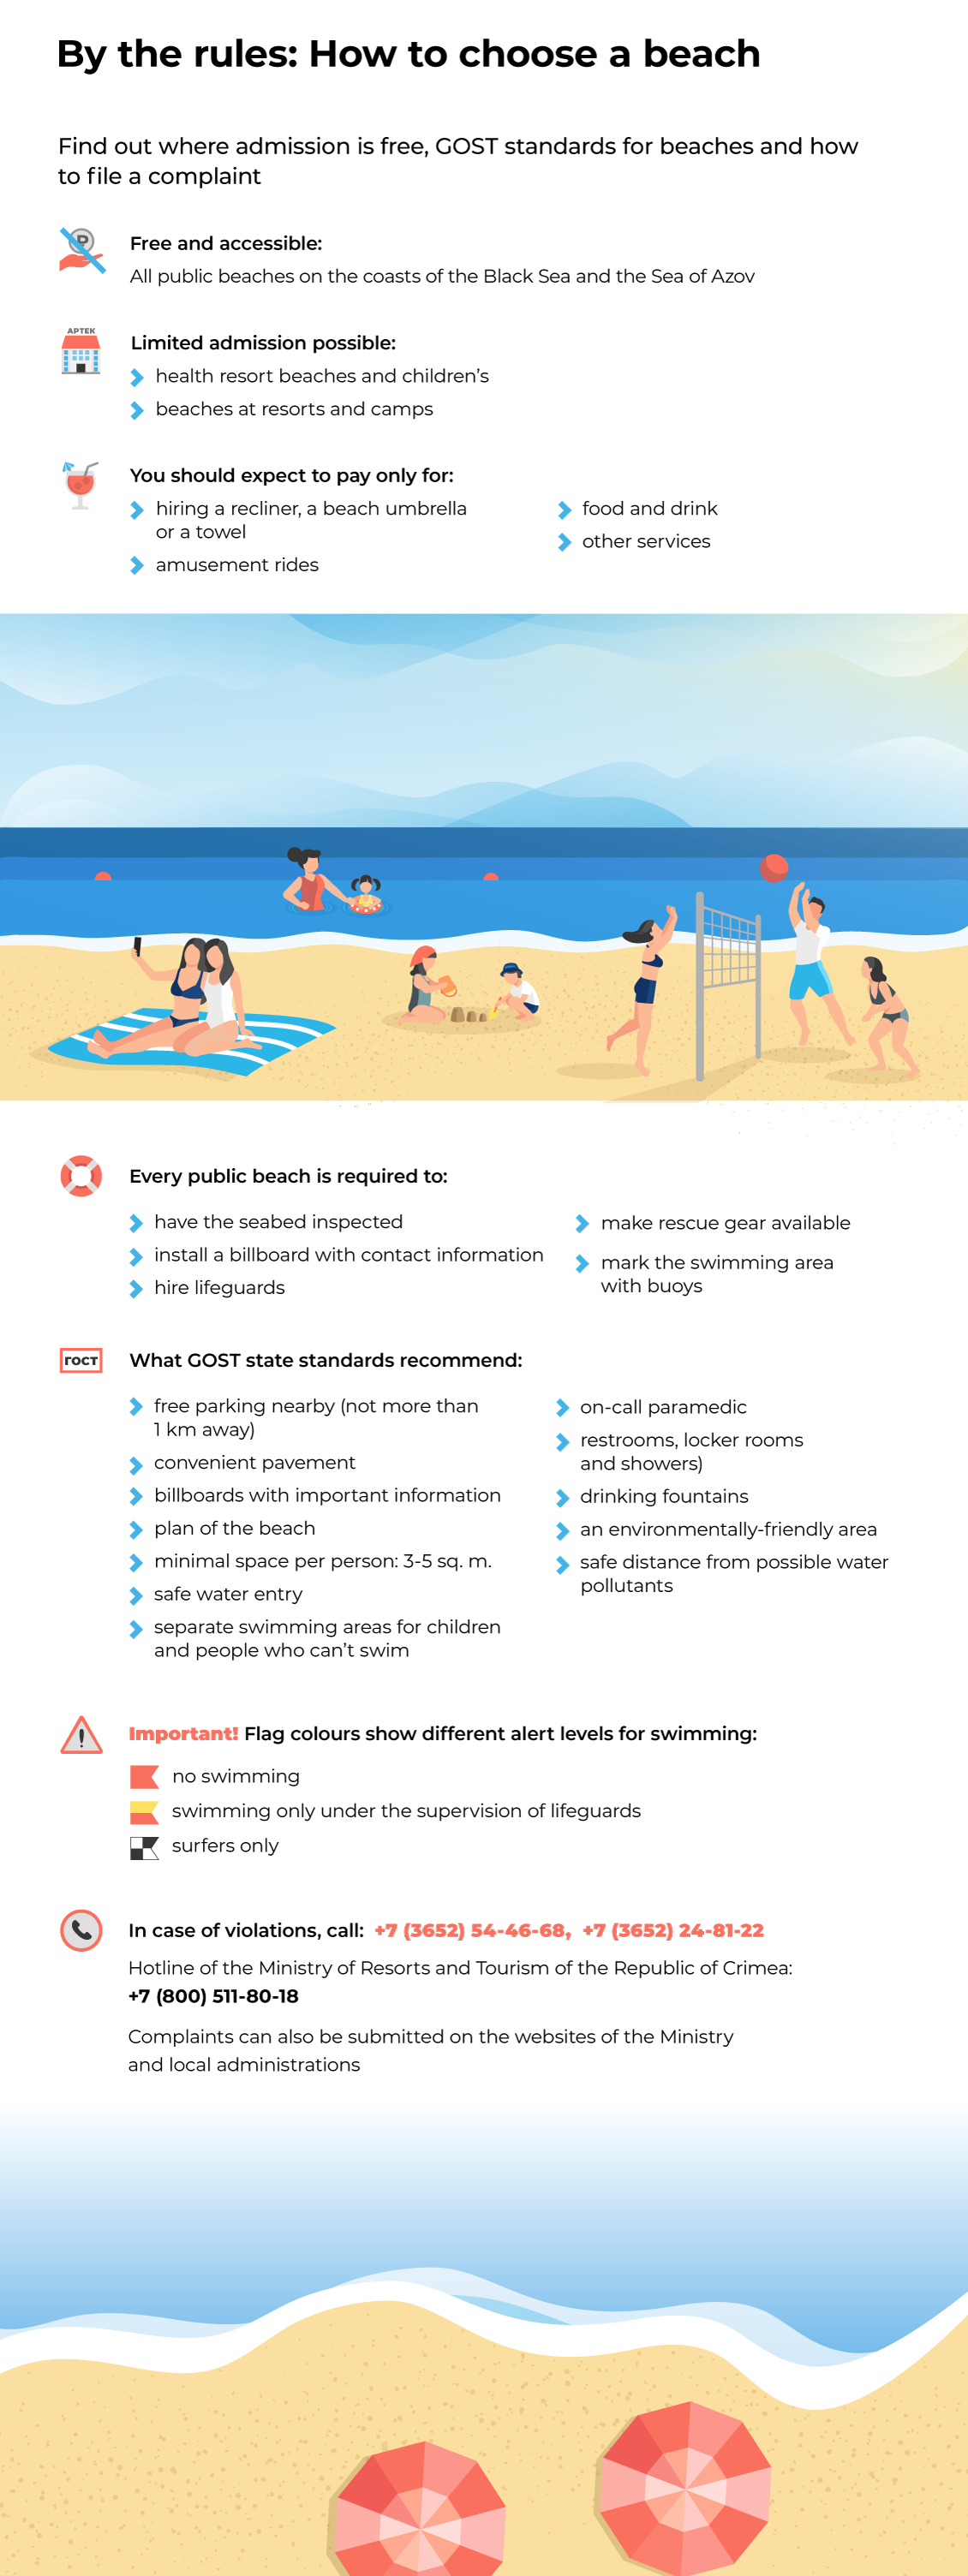 By the rules: How to choose a beach